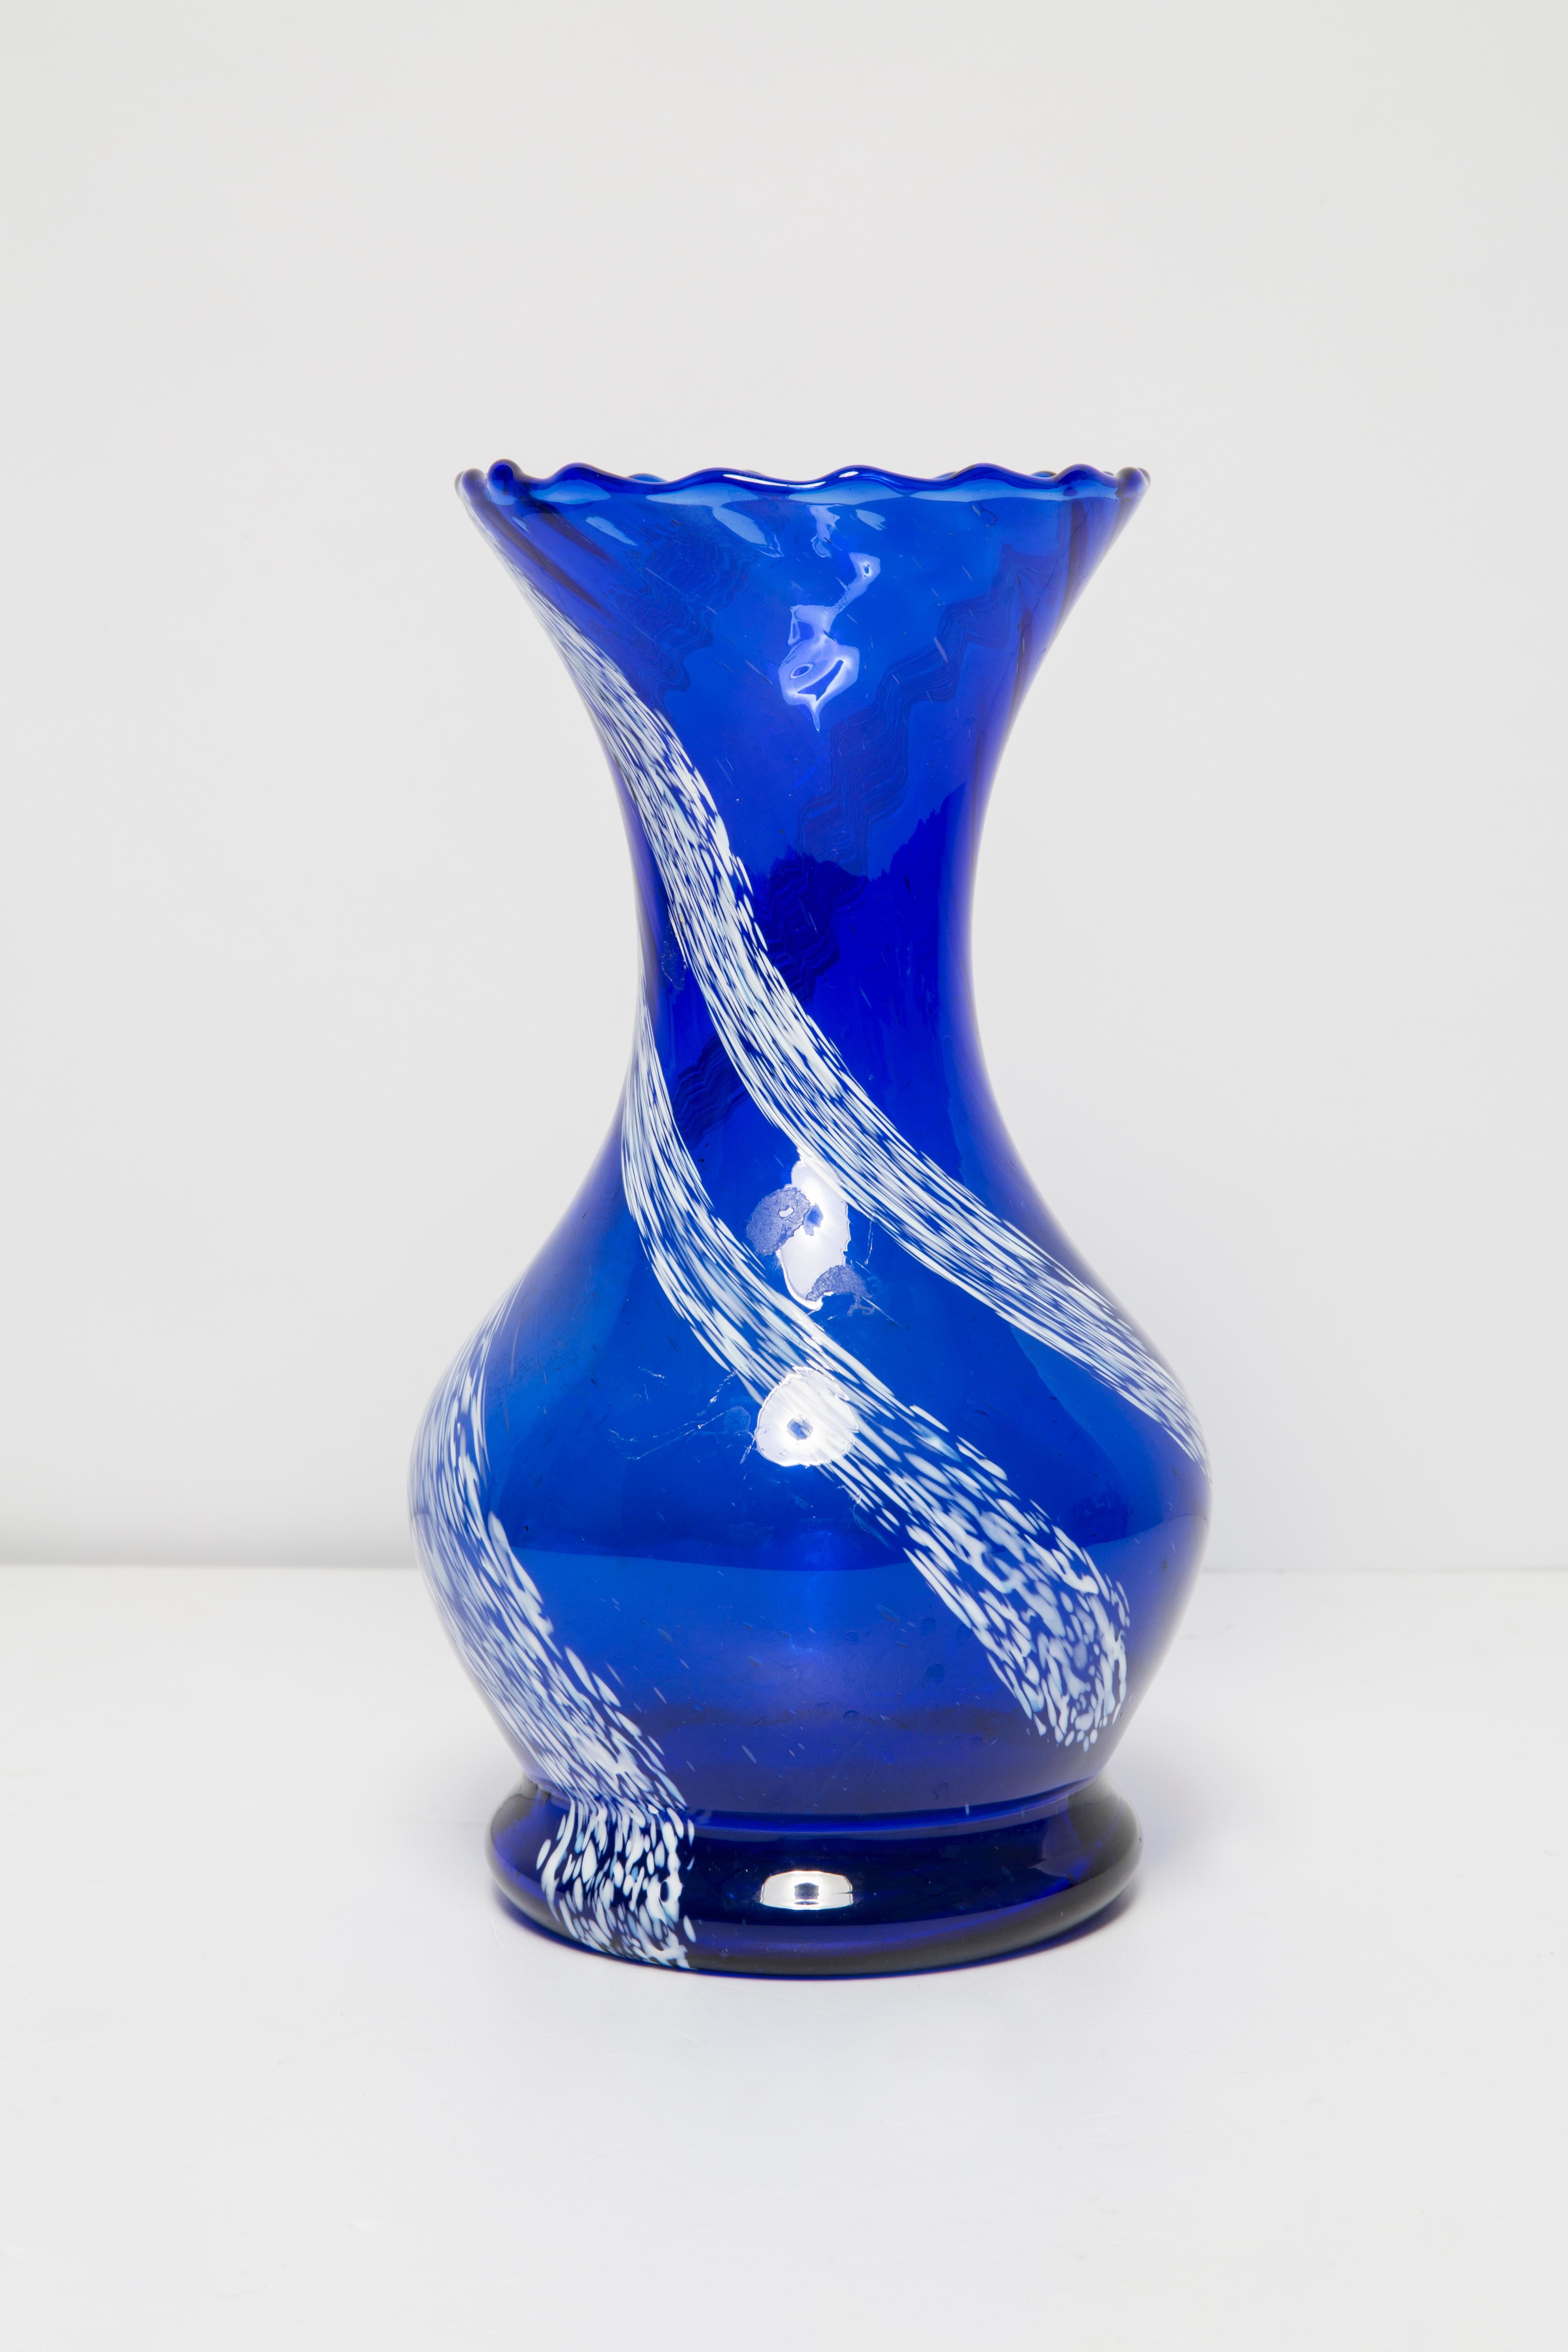 Mid Century Vintage Blue and White Artistic Glass Vase, Europe, 1970s For Sale 2